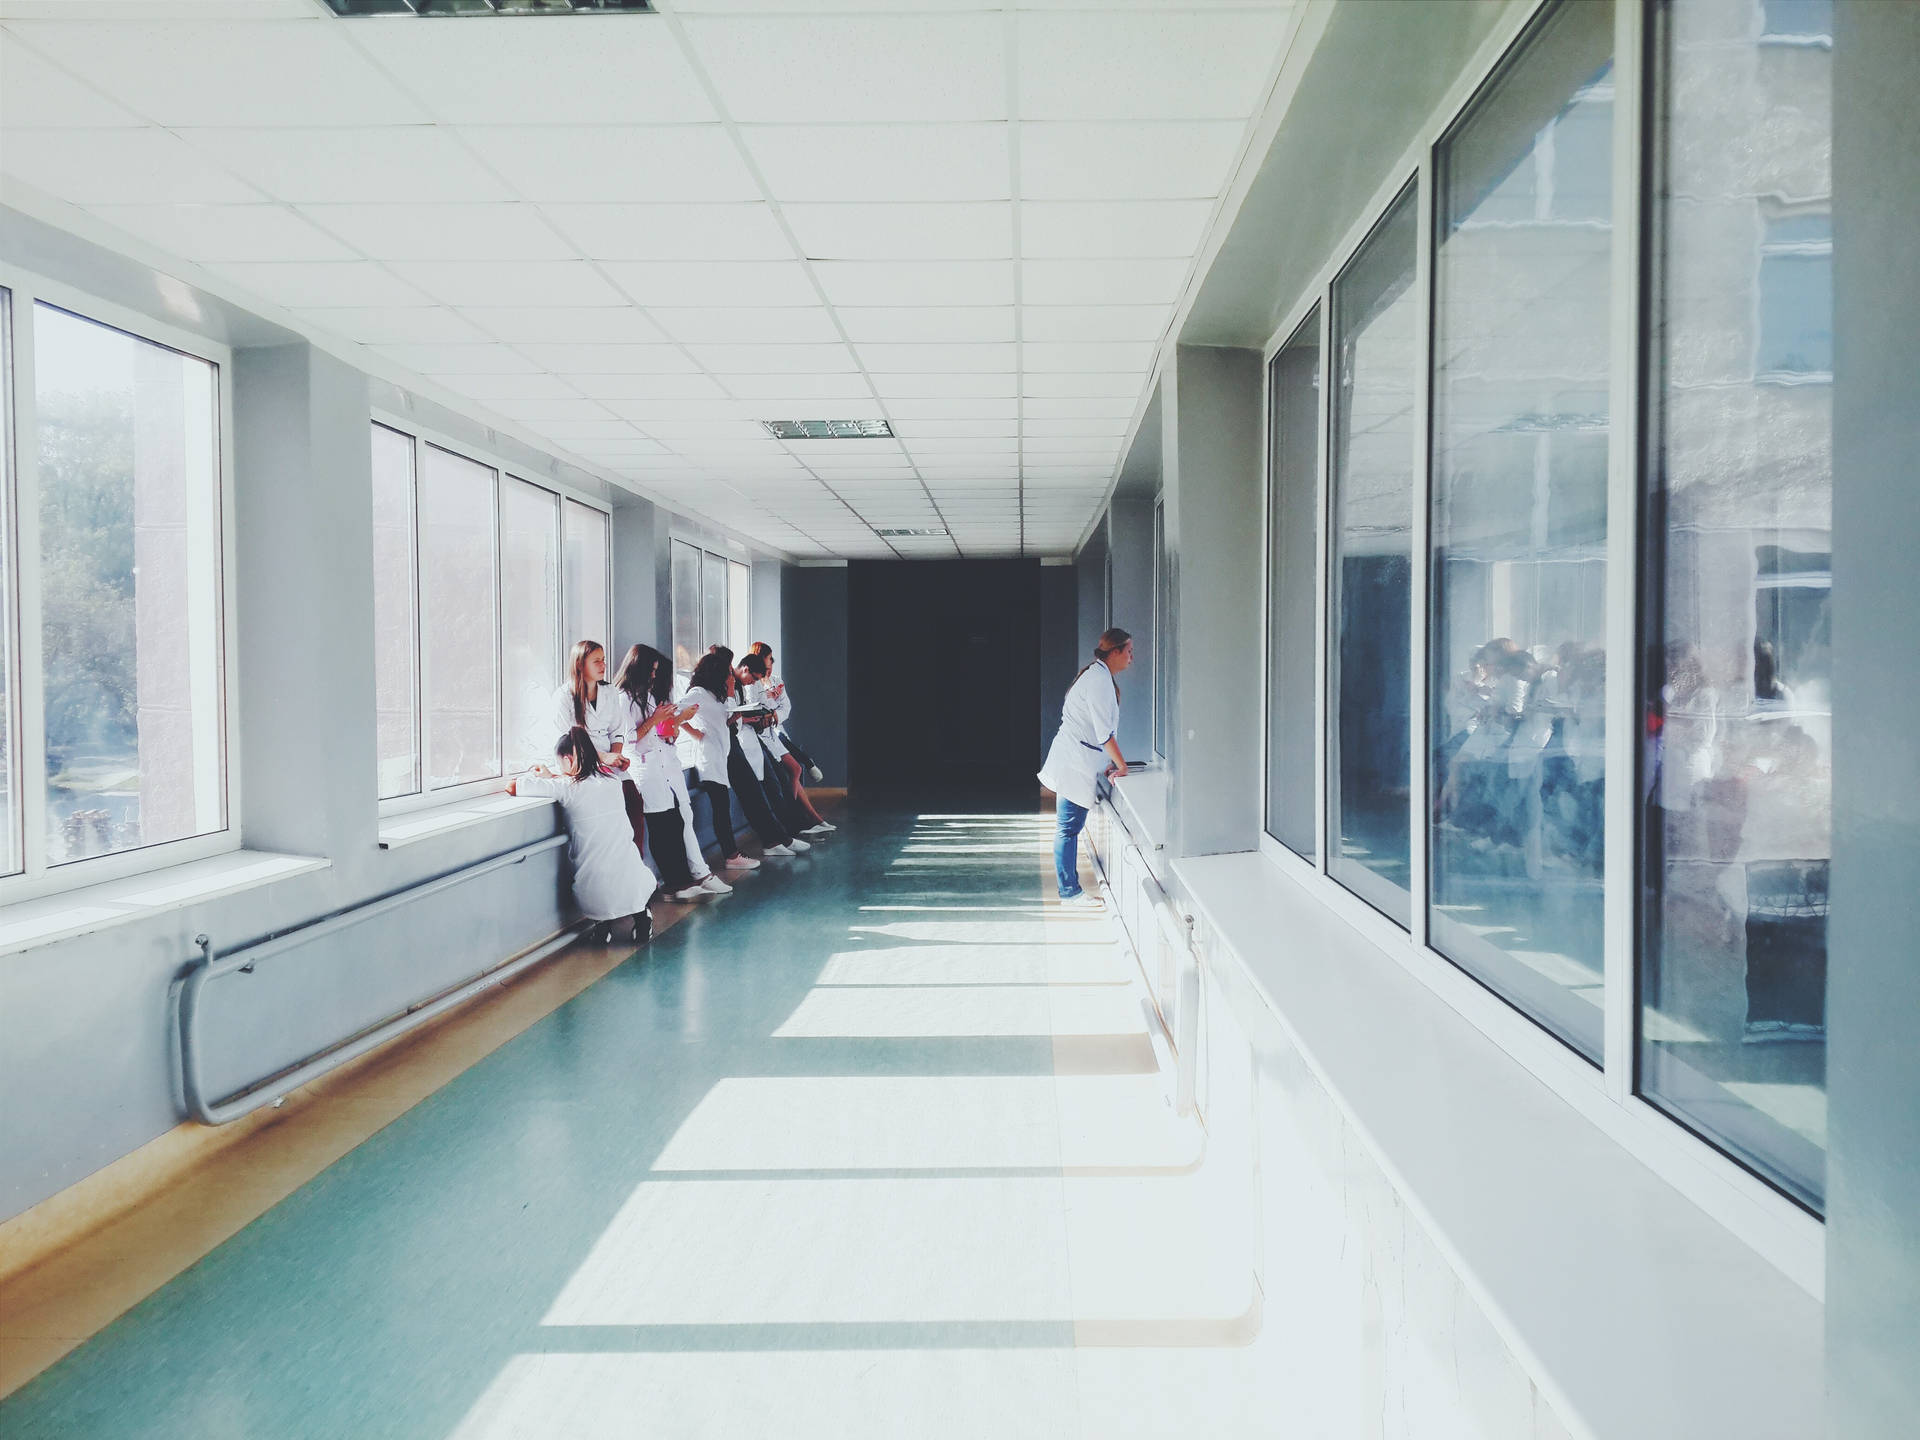 Doctors Observing In The Hallway Background